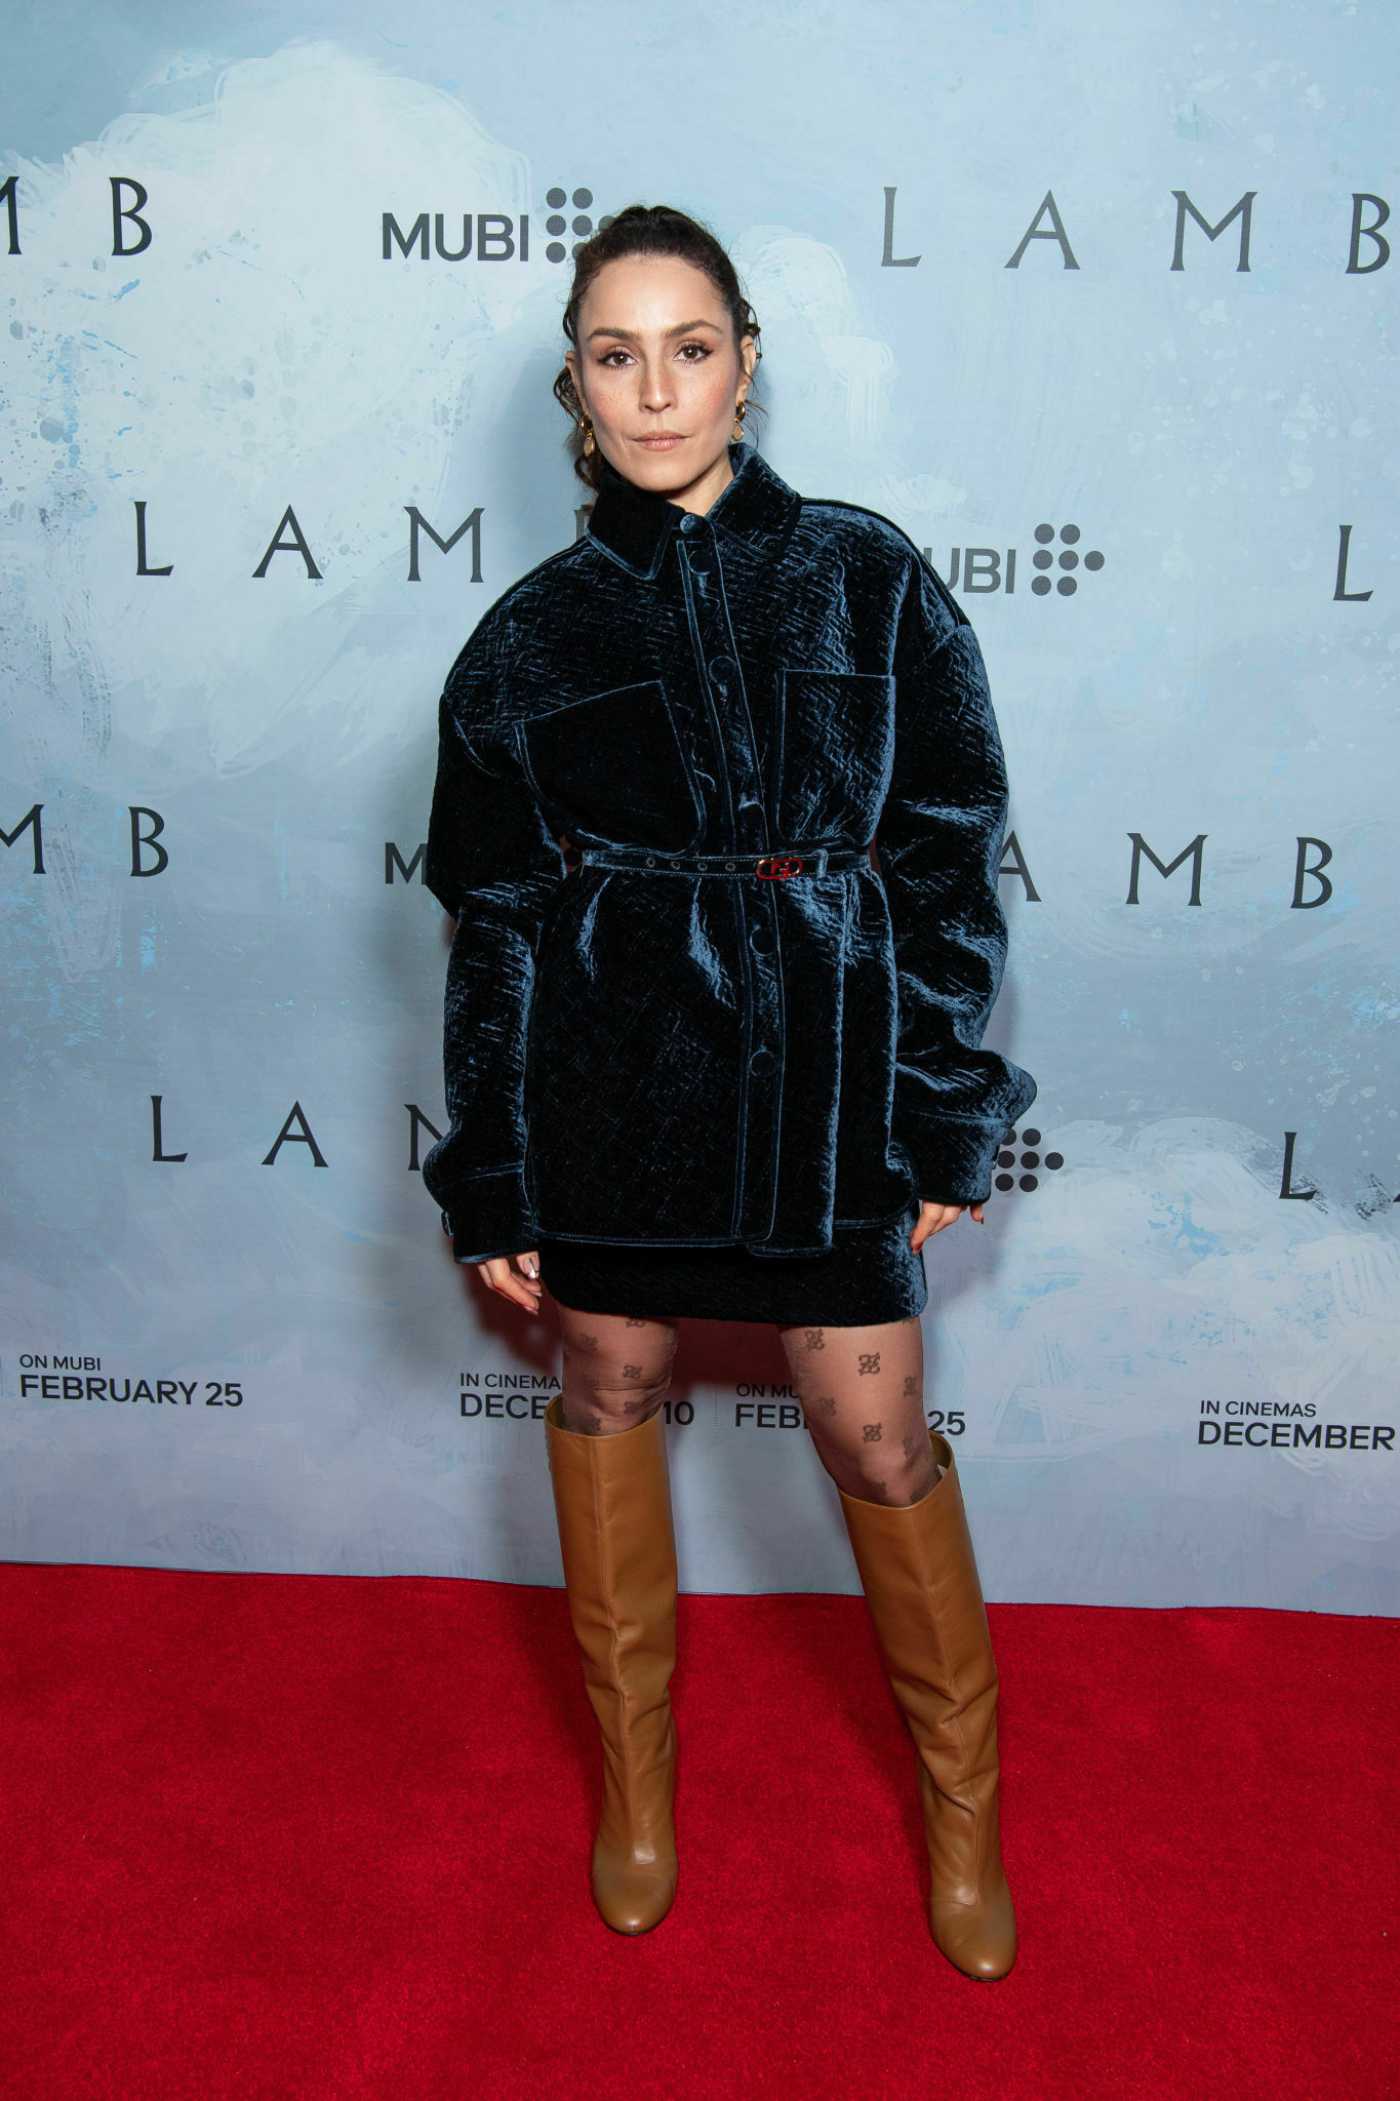 Noomi Rapace Attends The Lamb Gala Screening in London 12/08/2021